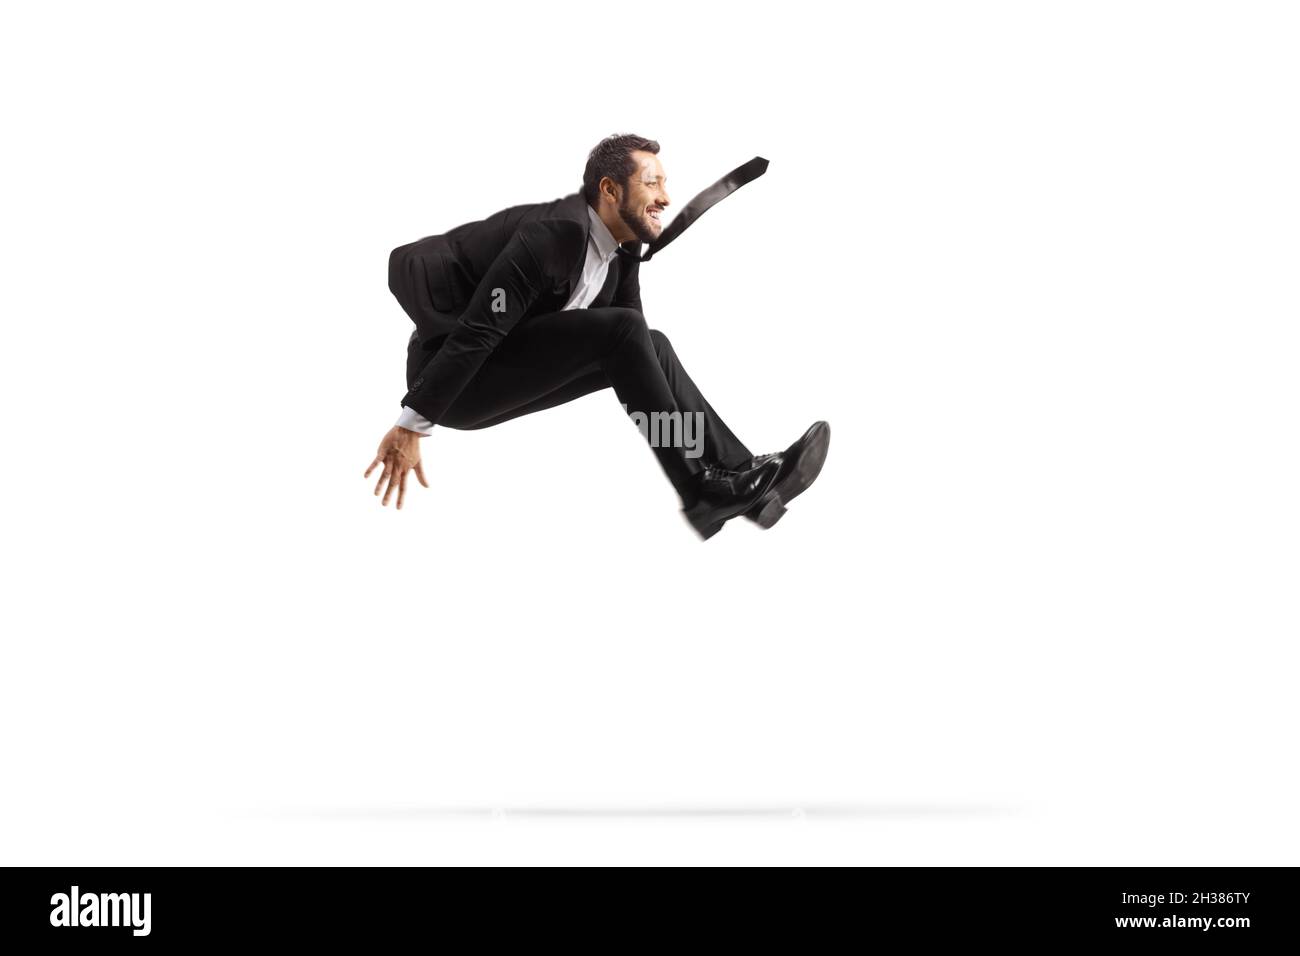 Profile shot of a businessman jumping isolated on white background Stock Photo